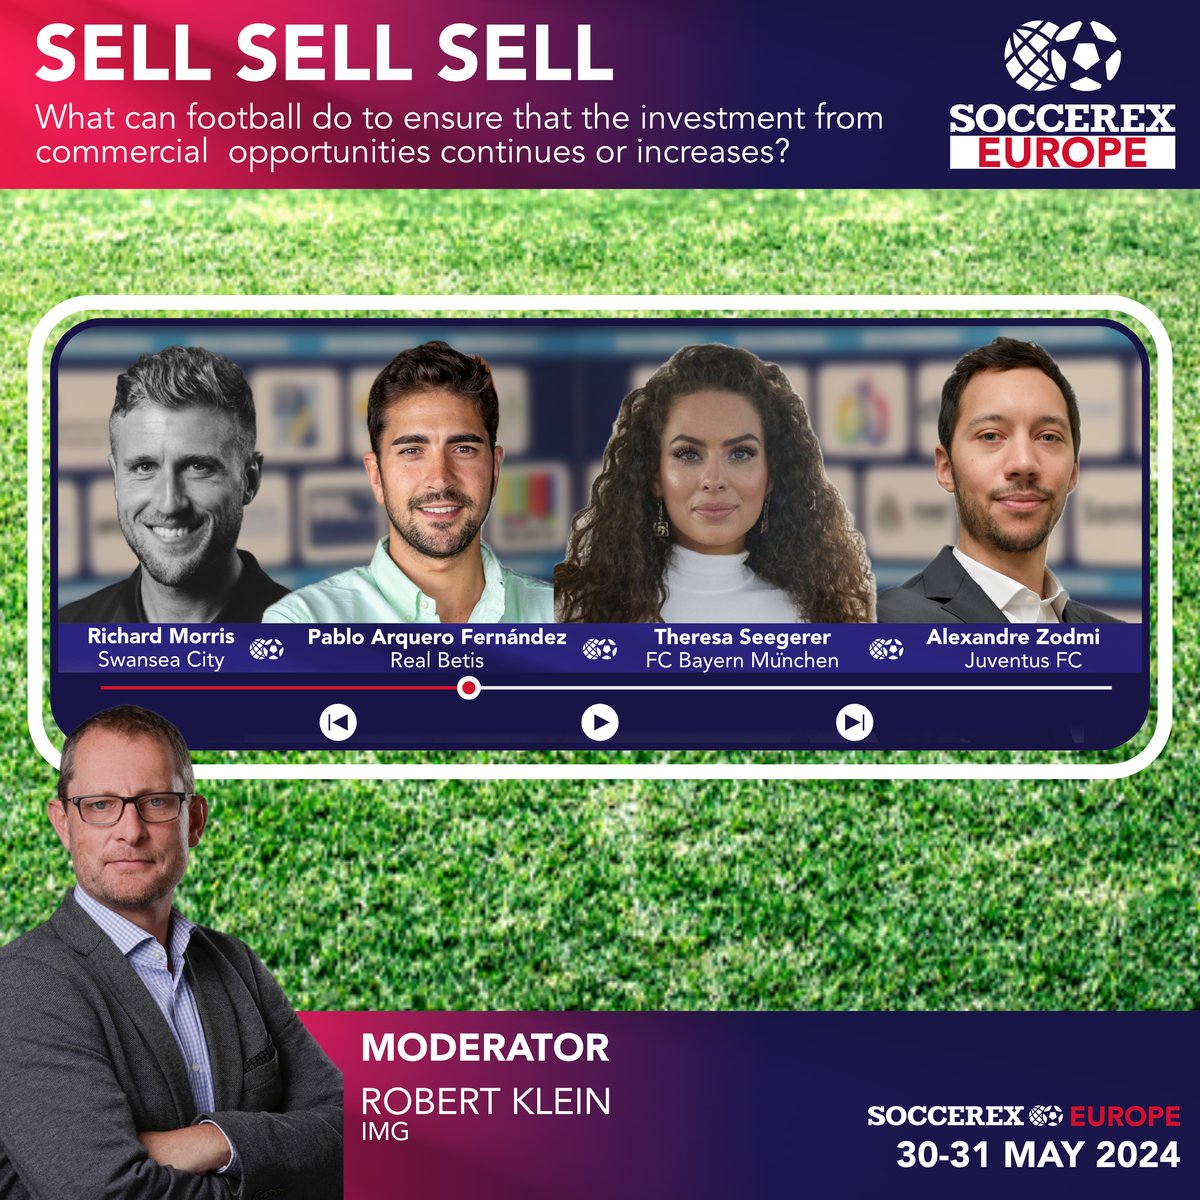 Sell, sell, sell ⚽ Panellists include: 🗣️ Richard Morris, @SwansOfficial 🗣️ Pablo Arquero Fernández, @RealBetis 🗣️ Theresa Seegerer, @FCBayern 🗣️ Alexandre Zodmi, @juventusfc 🎙️ Moderated by Robert Klein, @IMG